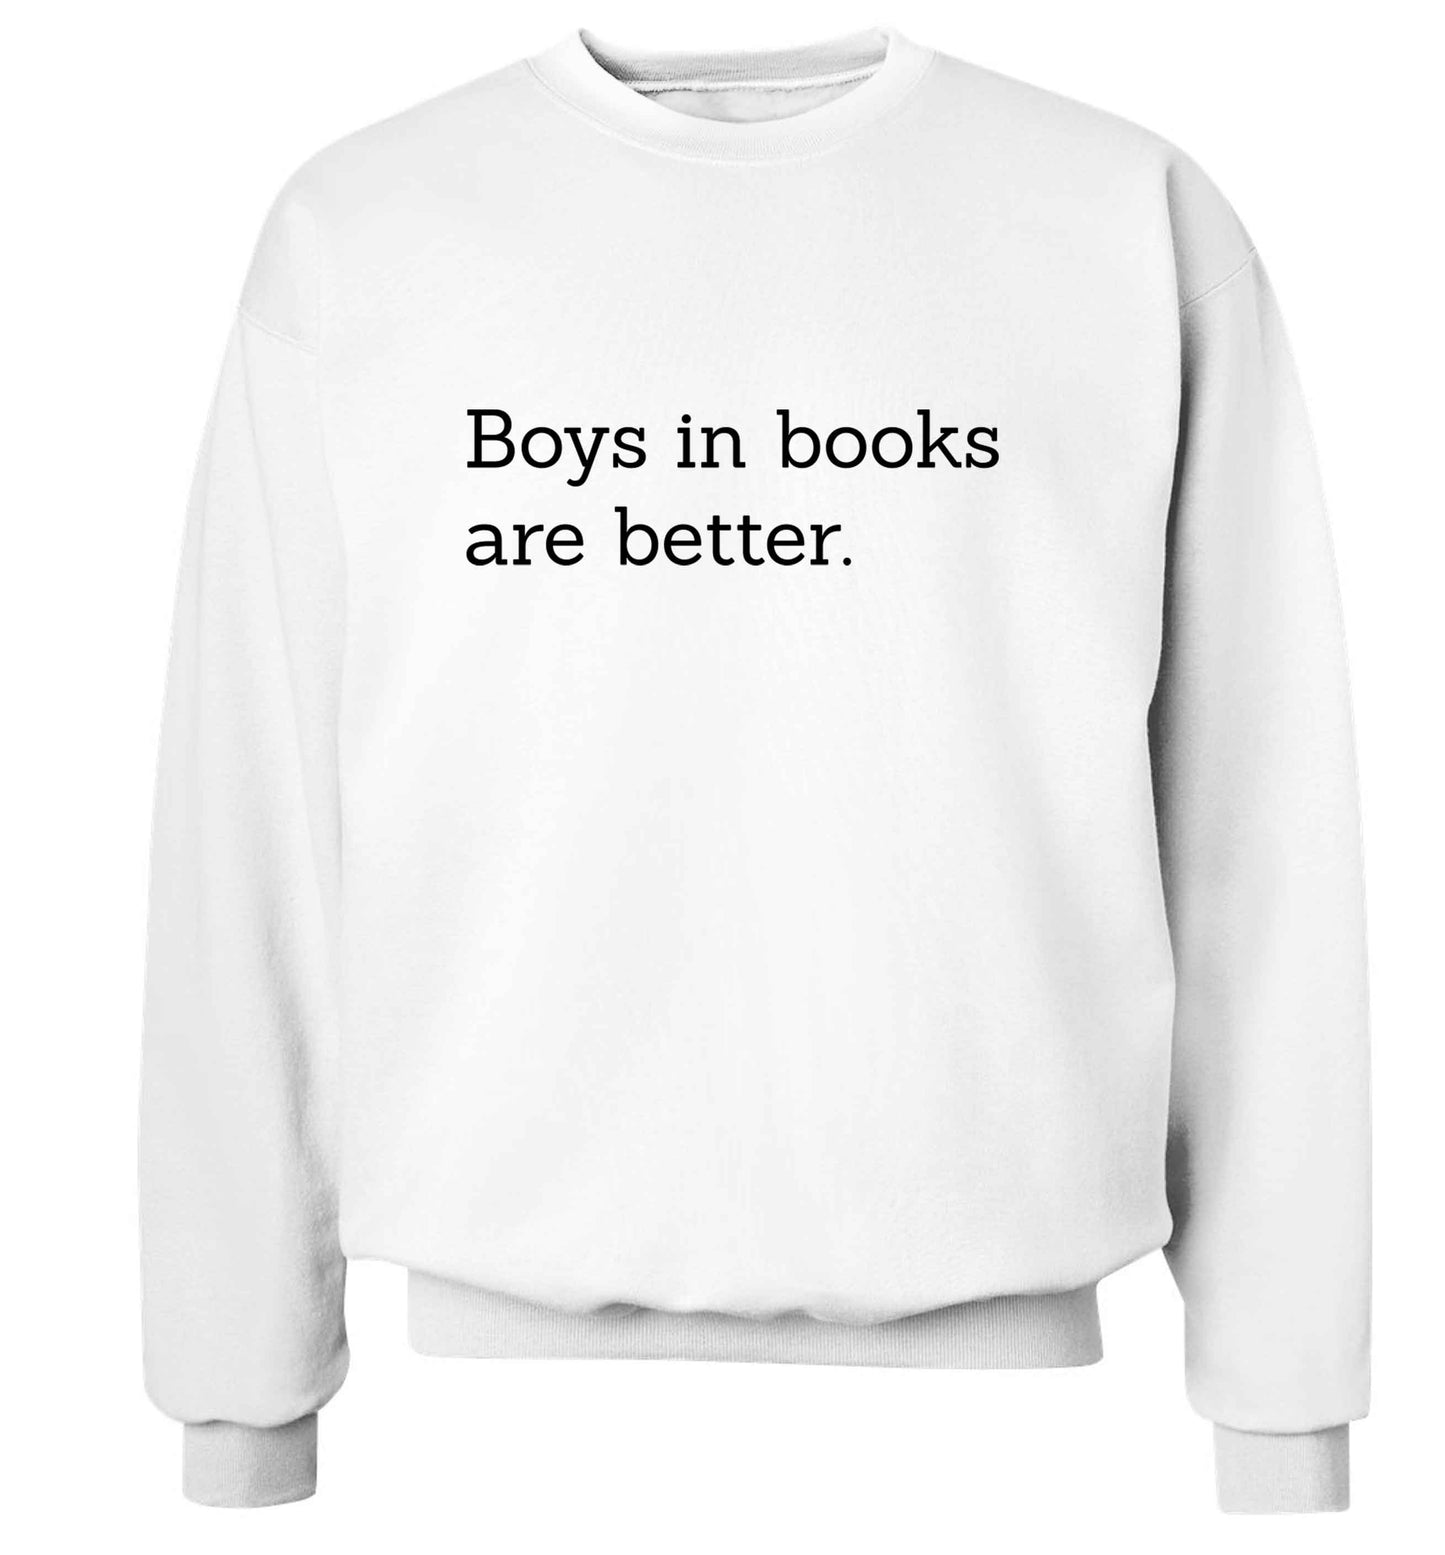 Boys in books are better adult's unisex white sweater 2XL